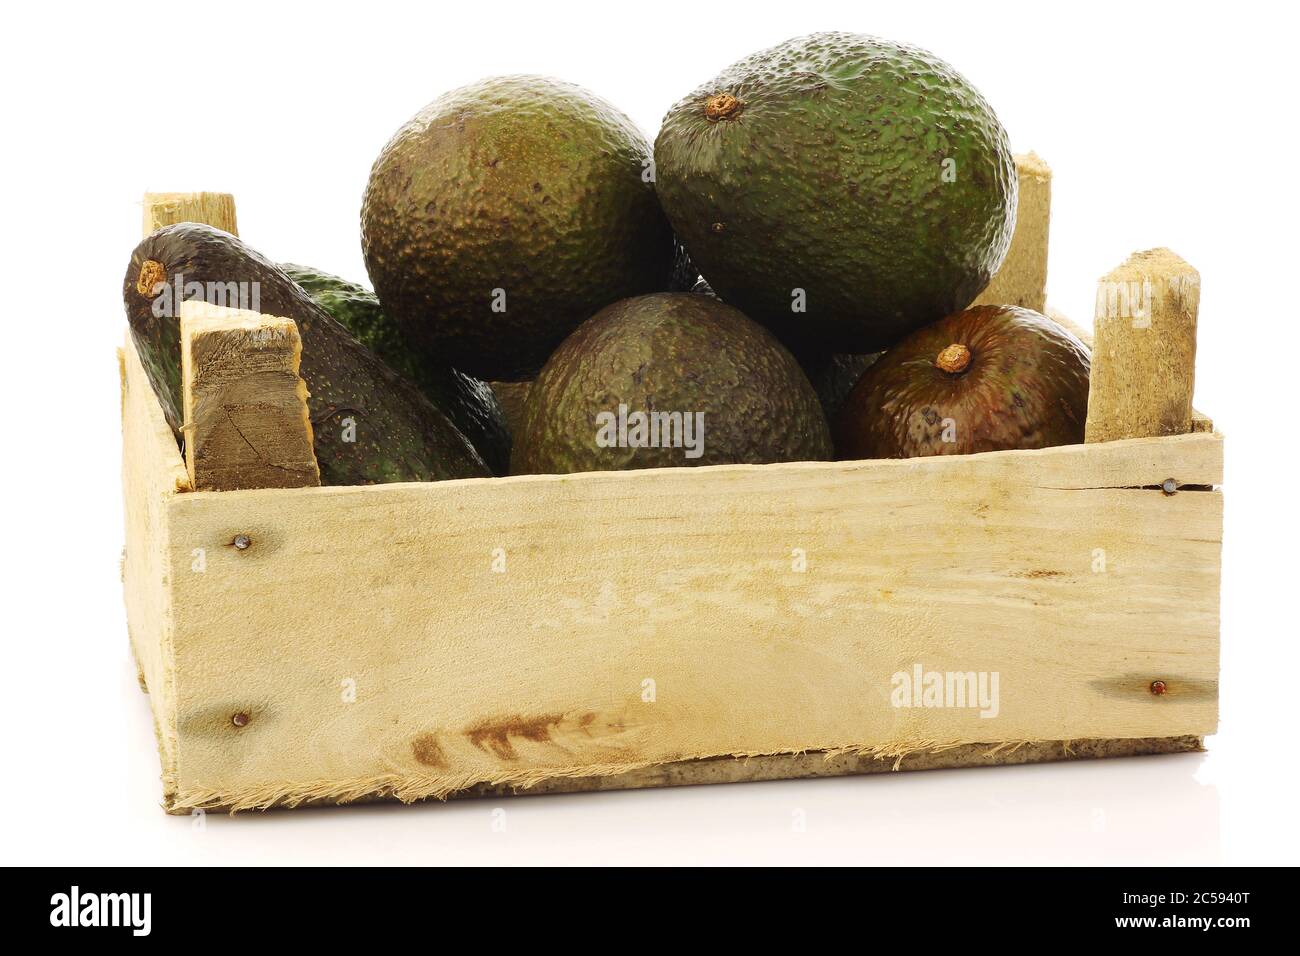 Download Avocados Box High Resolution Stock Photography And Images Alamy Yellowimages Mockups